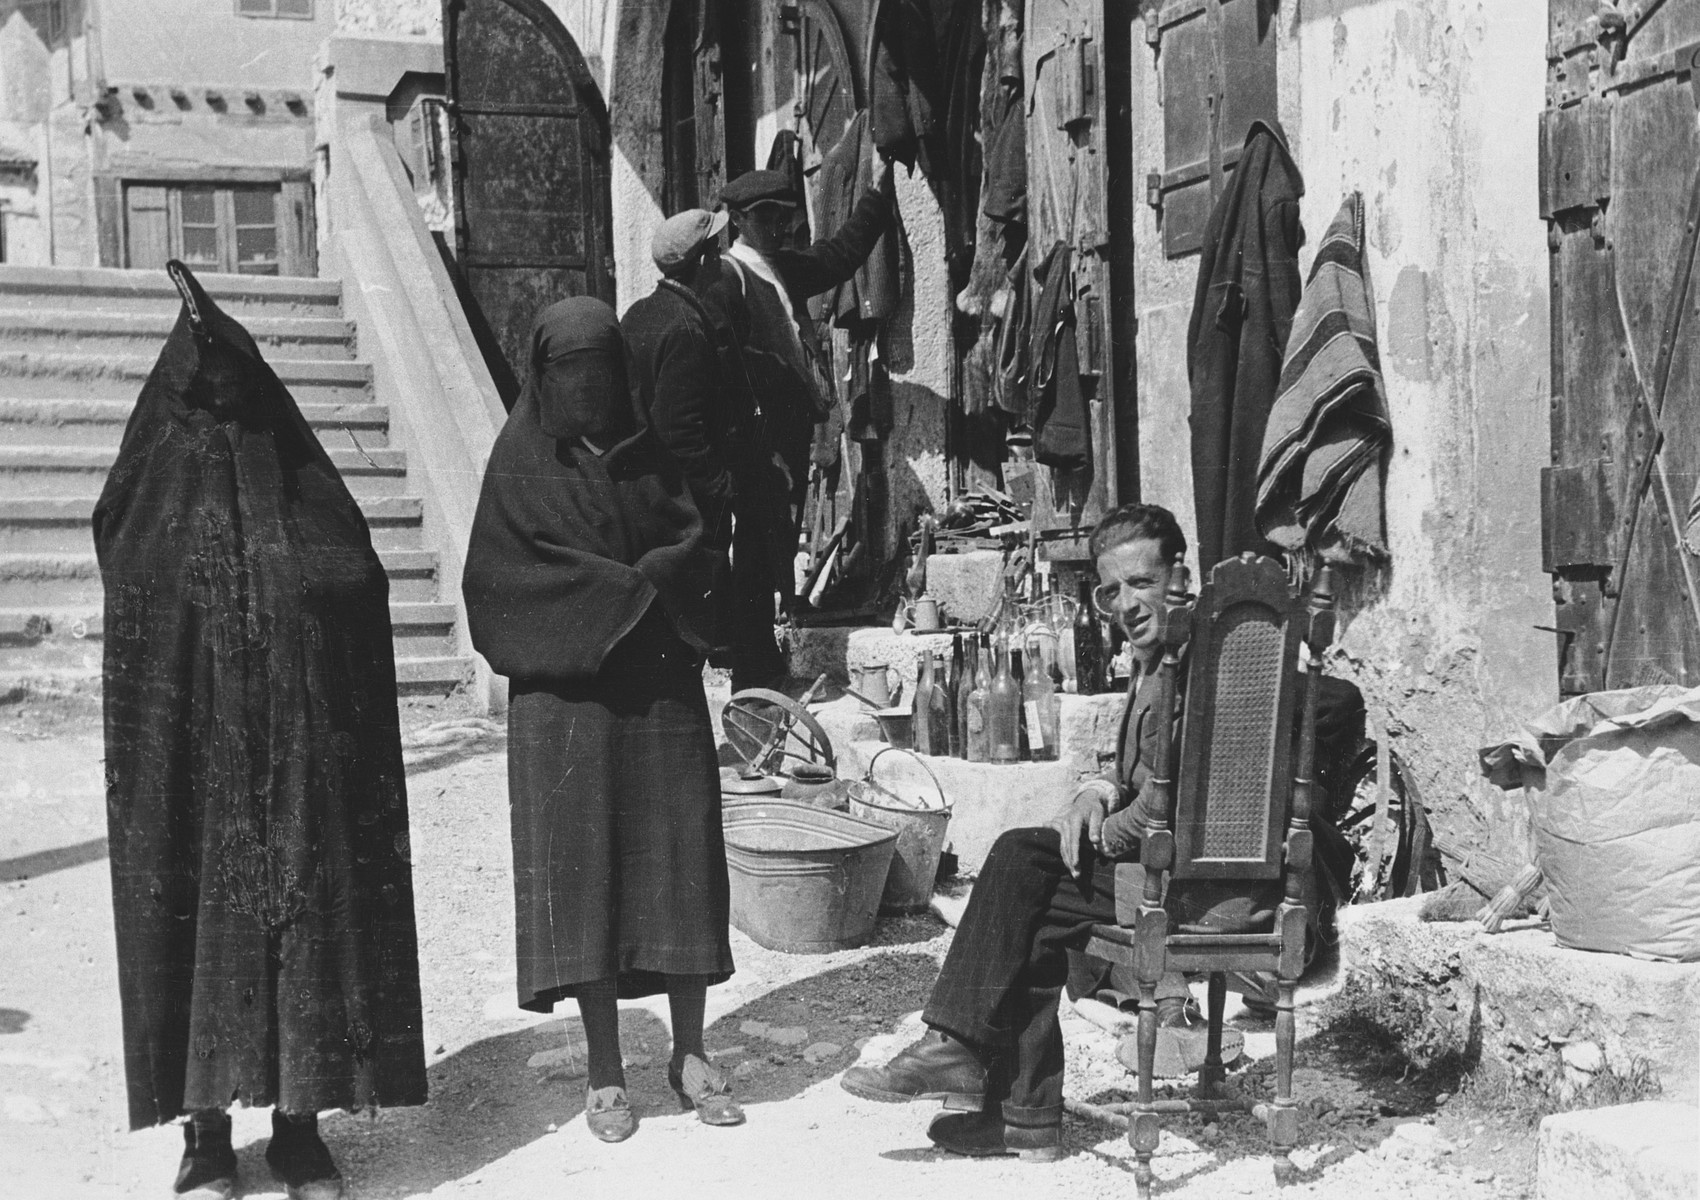 Two veiled women walk past a small shop on a street in Mostar. 

The original Waffen-SS caption reads, "Fruehere Hauptstrasse in Mostar."  (Tranlsated,  "Former mainstreet in Mostar.")

One of a series of photographs taken by the 7th SS Volunteer Mountain Division Prinz Eugen in Croatia, Serbia, and Montenegro from 1942 to 1944, after the German invasion of the Kingdom of Yugoslavia. The photographs are believed to have been captioned by the commanding office of the Waffen-SS, and had been in the possession of  Friedrich Wilhem Krueger, who served with the division from November 1943 until April 1944.